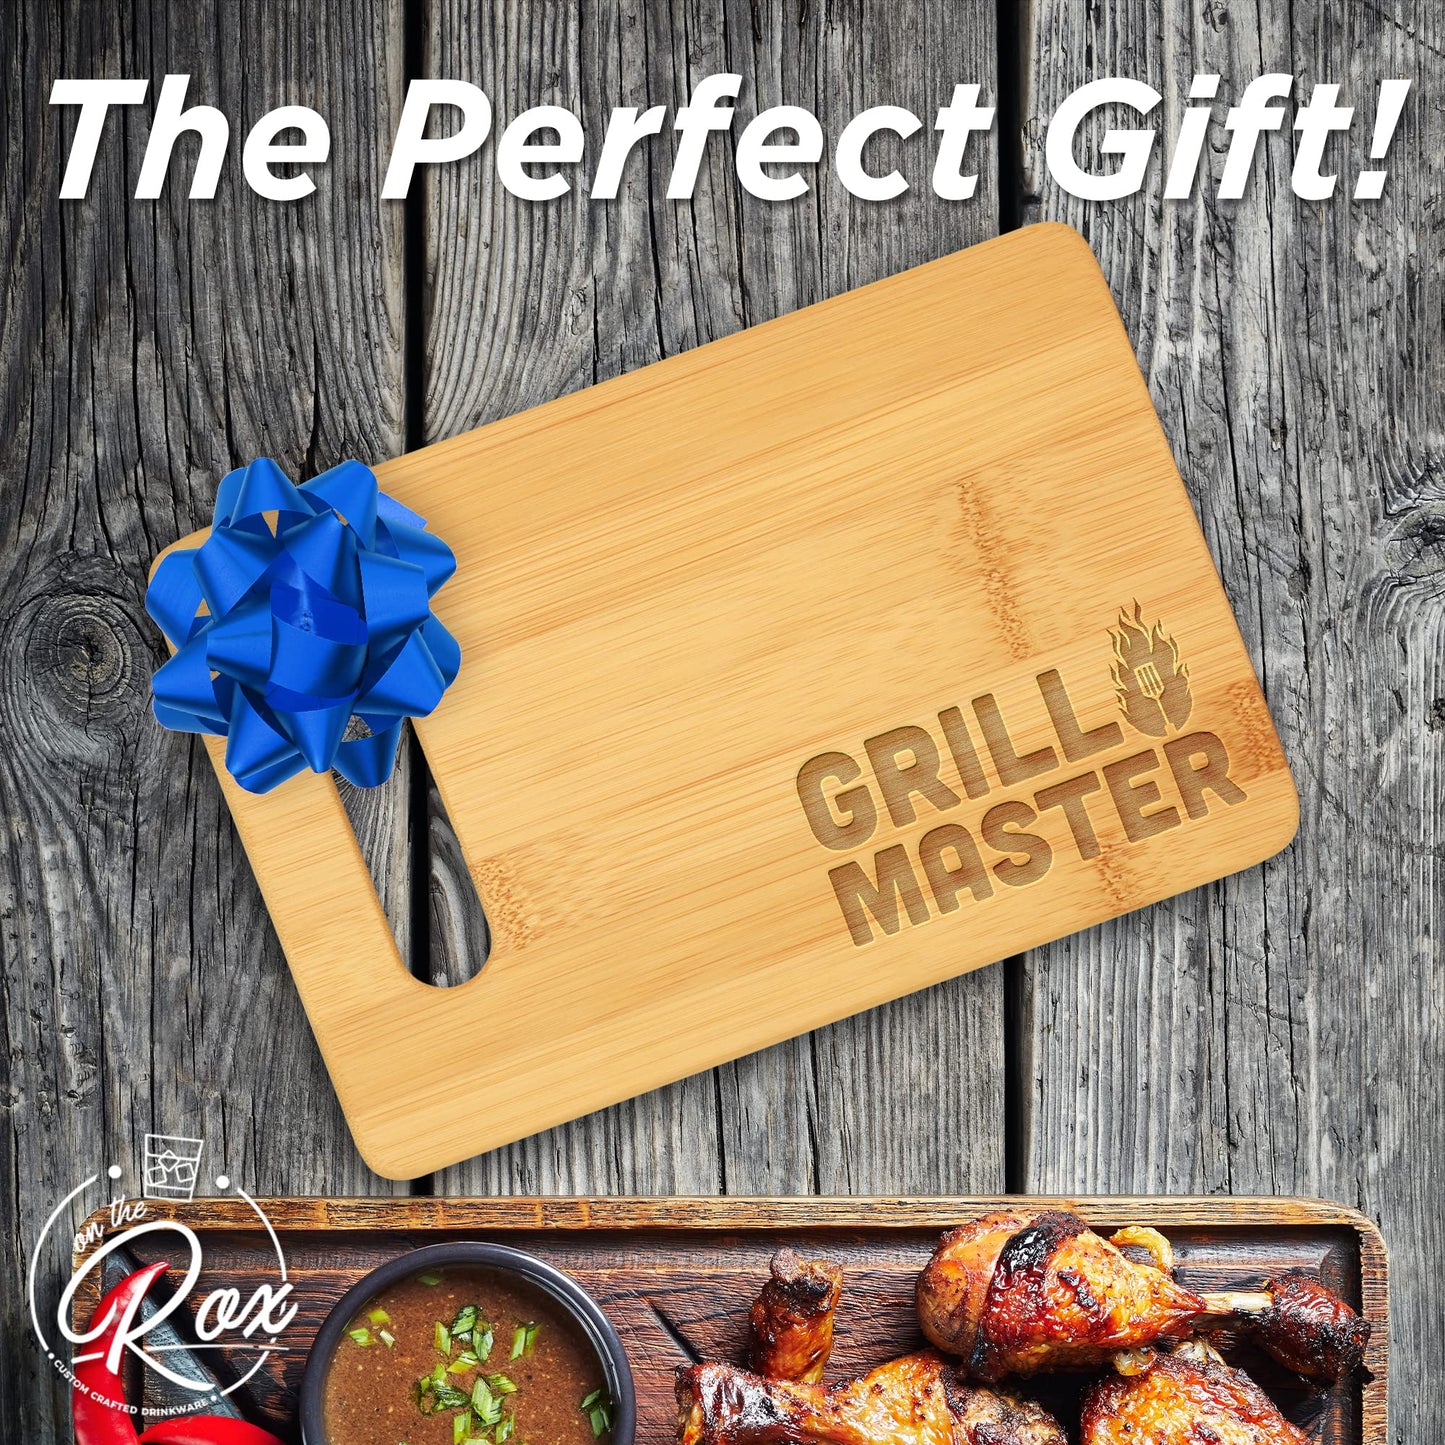 On The Rox Gifts for Dad - Grill Master Cutting Board (9”x6”) - Personalized Dad Gifts for Men - Engraved Bamboo Board for Grill Fathers, Papa, Stepdad -  Best Dad Ever Birthday, Fathers' Day Gifts